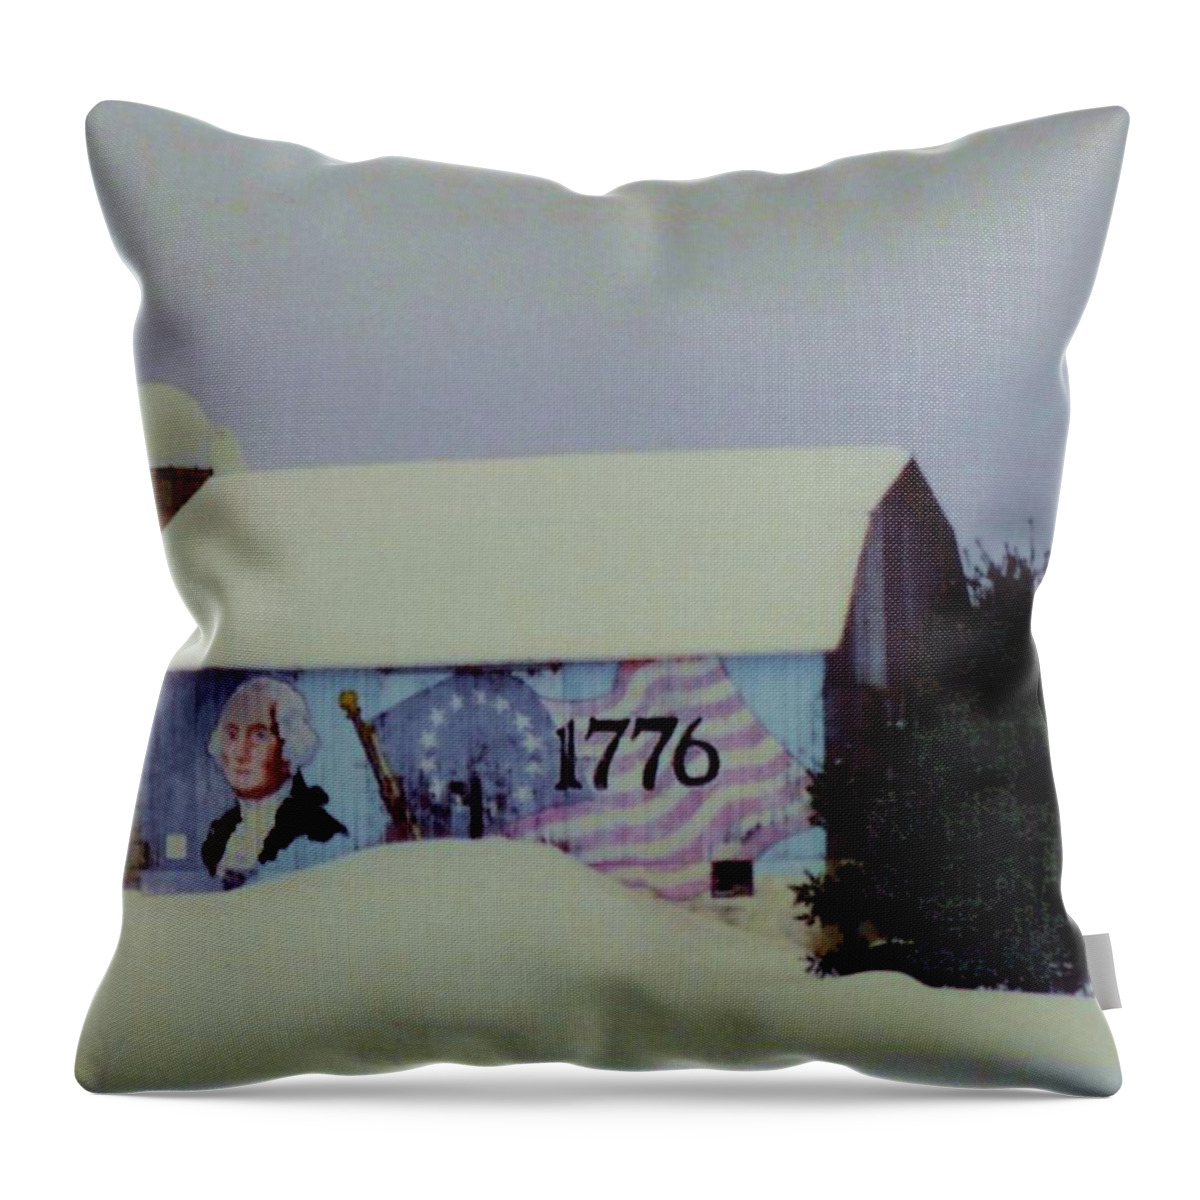 America Throw Pillow featuring the photograph Americana Barn by Desiree Paquette